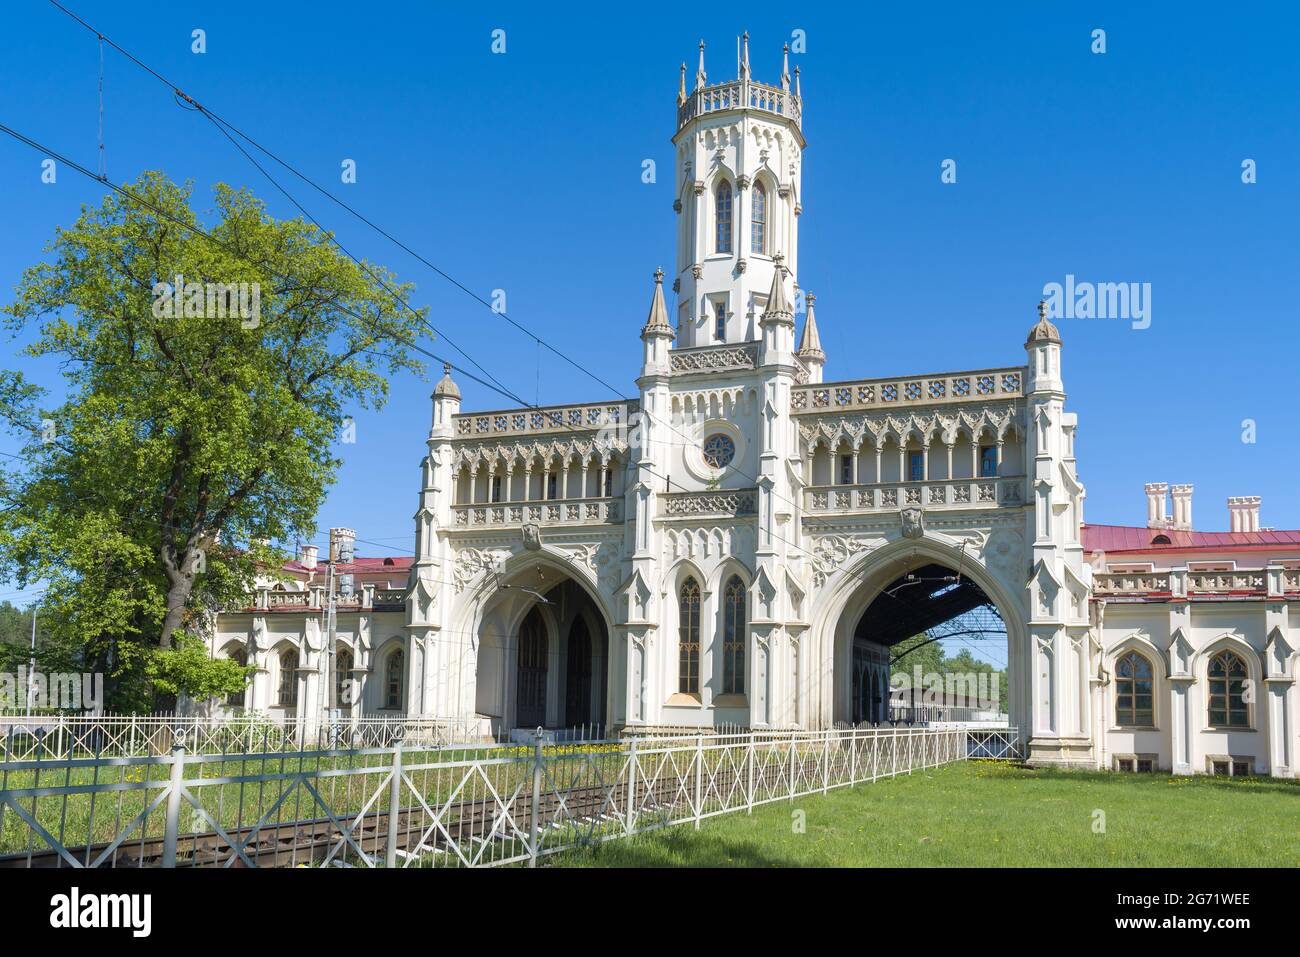 PETRODVORETS, RUSSIA - MAY 29, 2021: The old building of the railway station of the New Peterhof station on a sunny May day. Suburbs of St. Petersburg Stock Photo